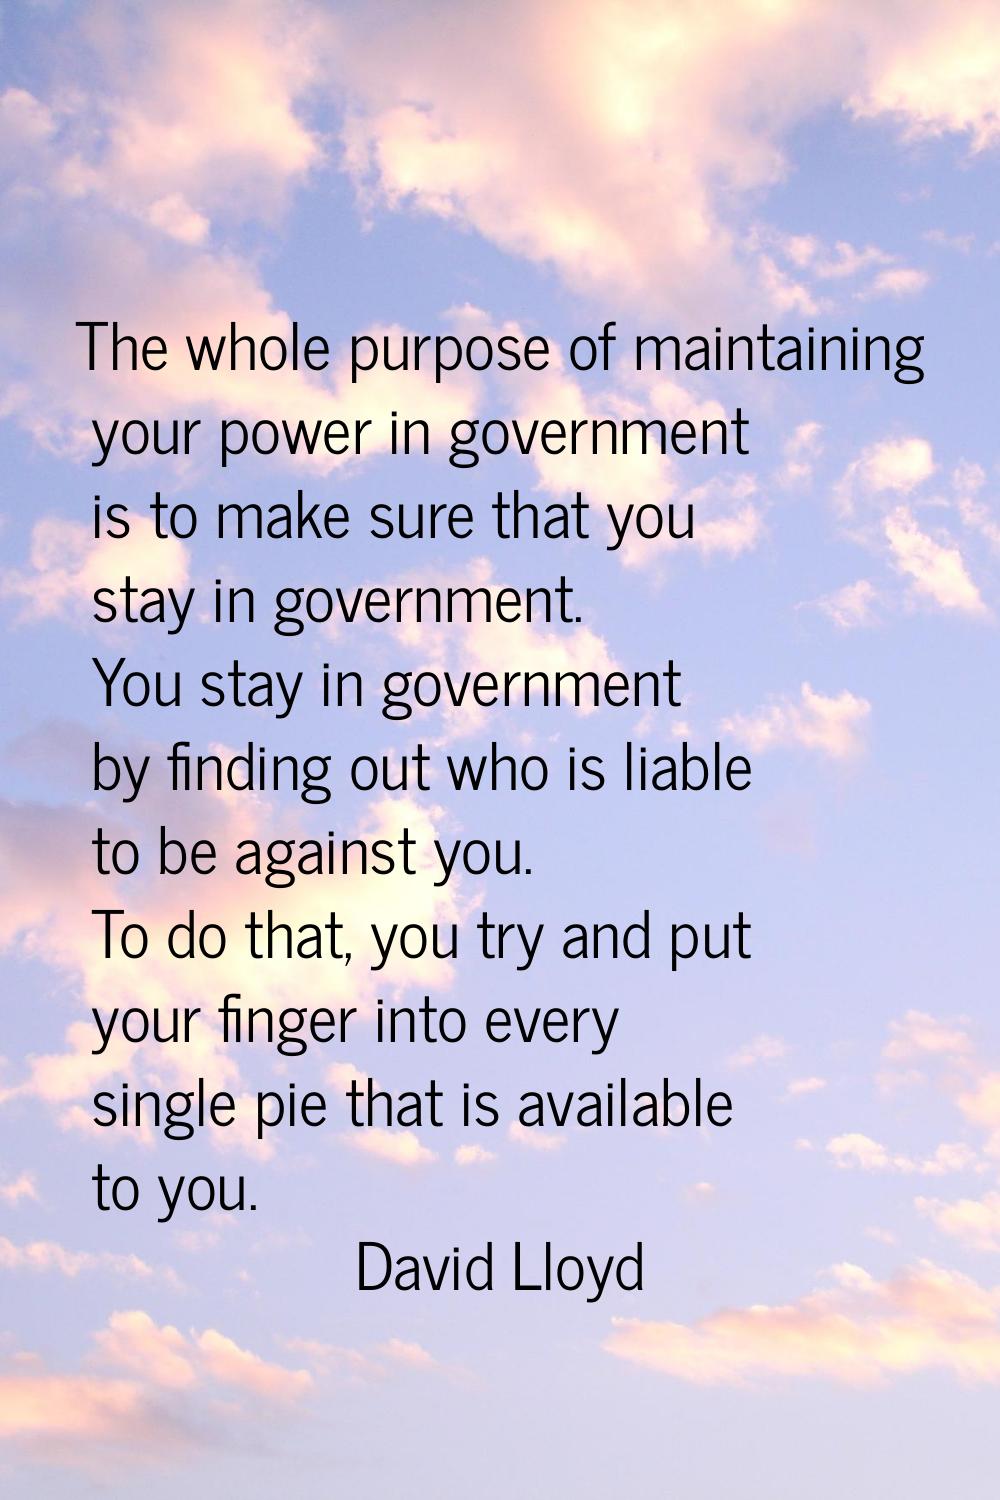 The whole purpose of maintaining your power in government is to make sure that you stay in governme